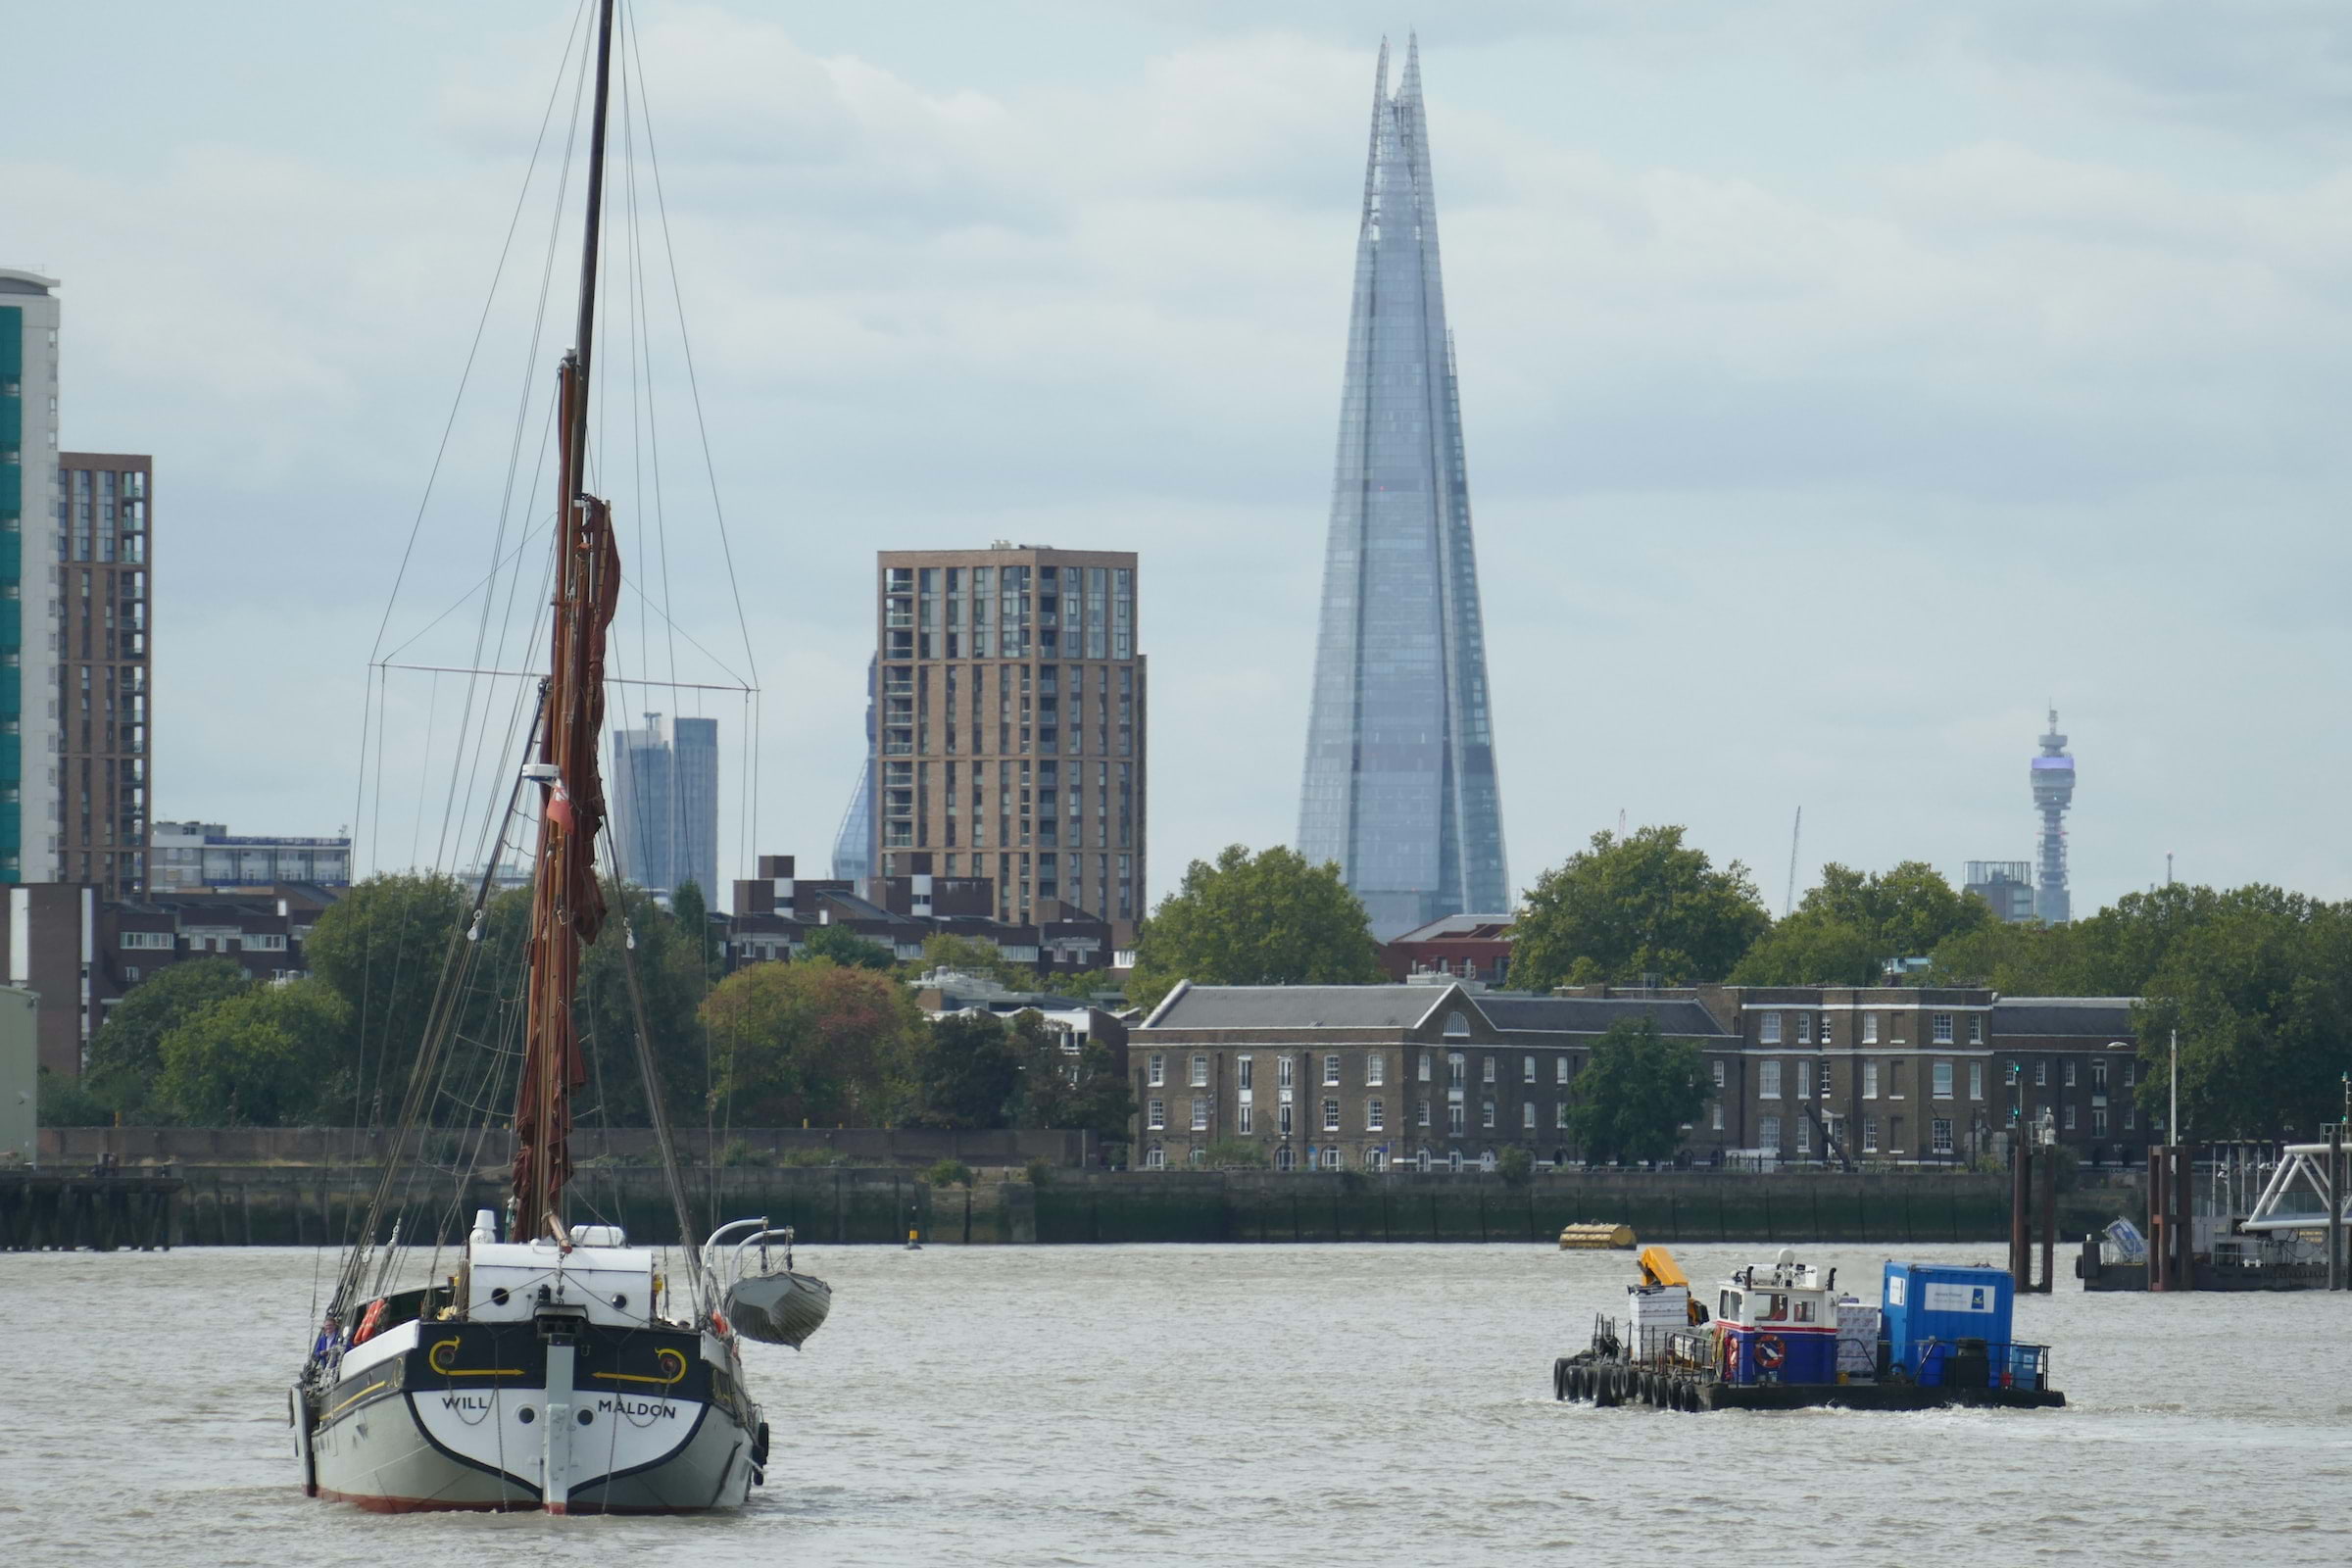 Guide to boat hire in London